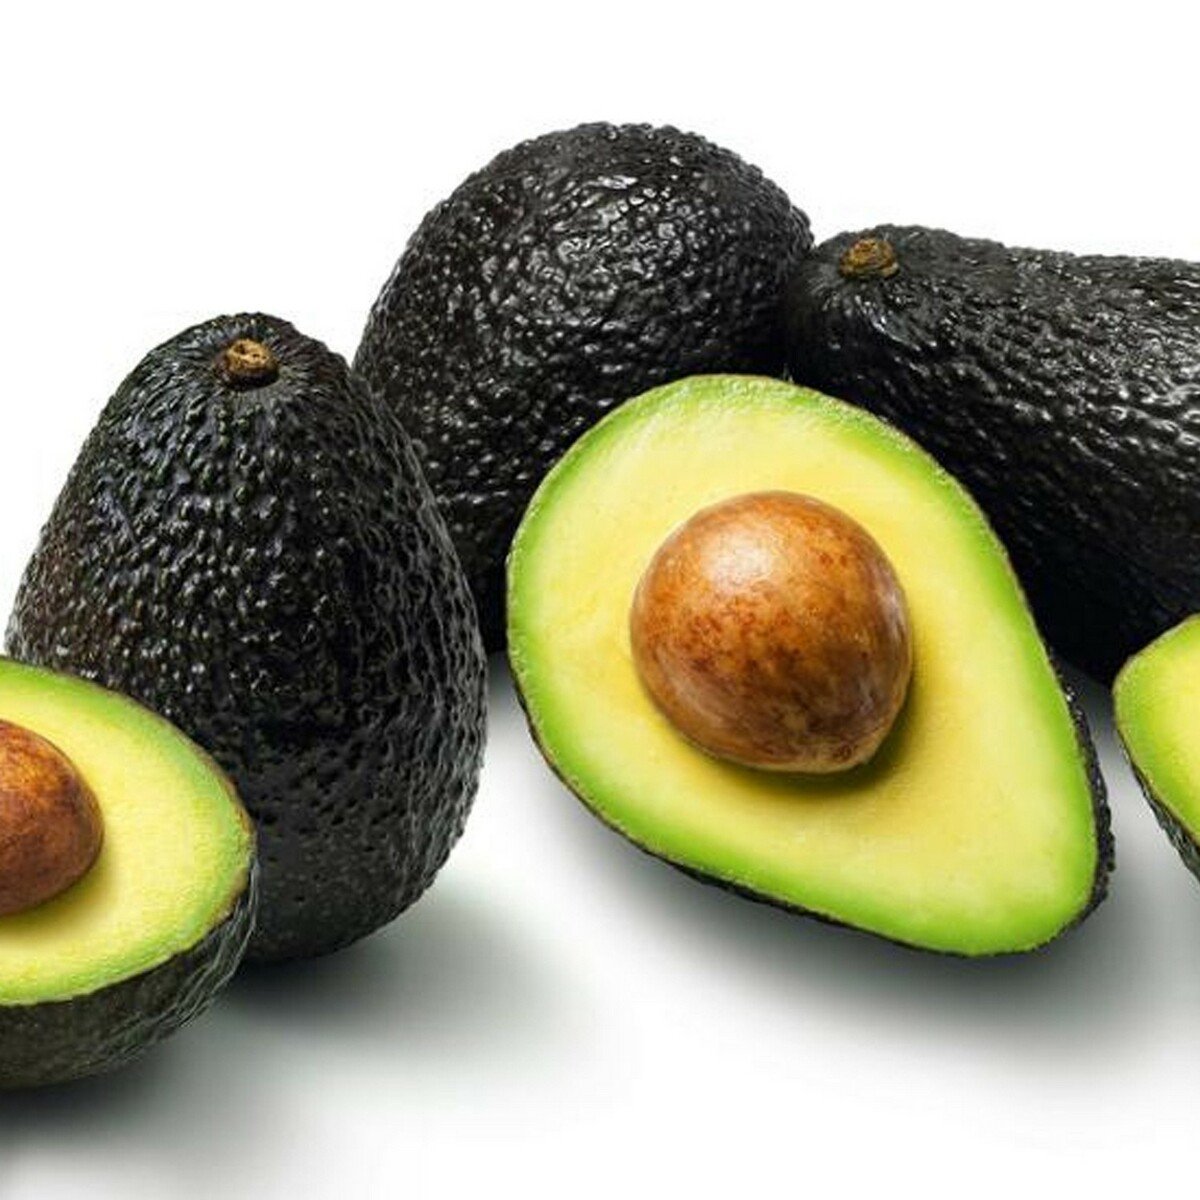 Avocado Hass 1kg Approx Weight